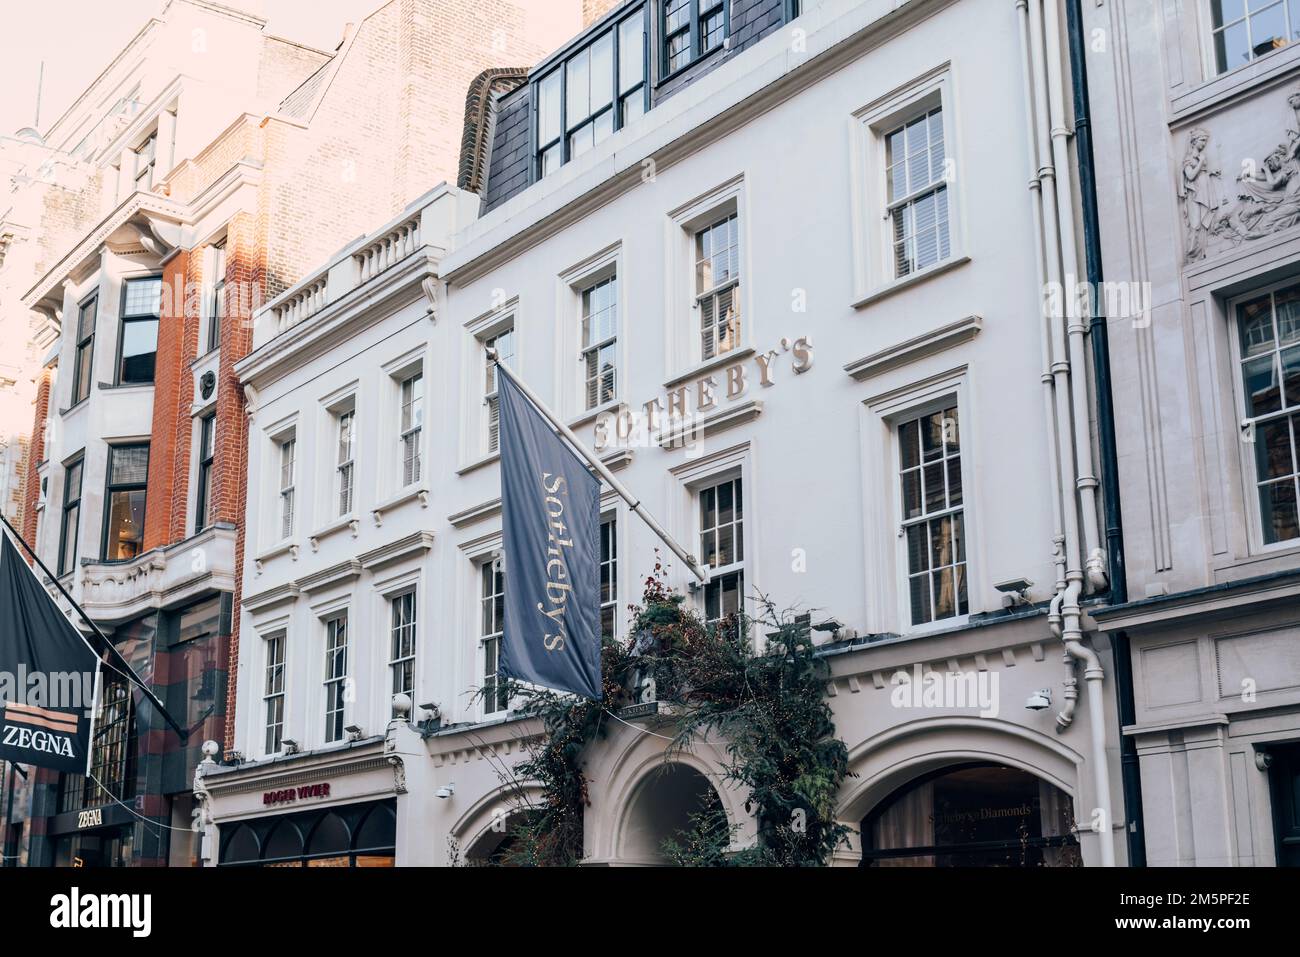 London, UK - December 26, 2022: Name and flag on the building of Sotheby's, one of the world's largest brokers of fine and decorative art, jewellery, Stock Photo